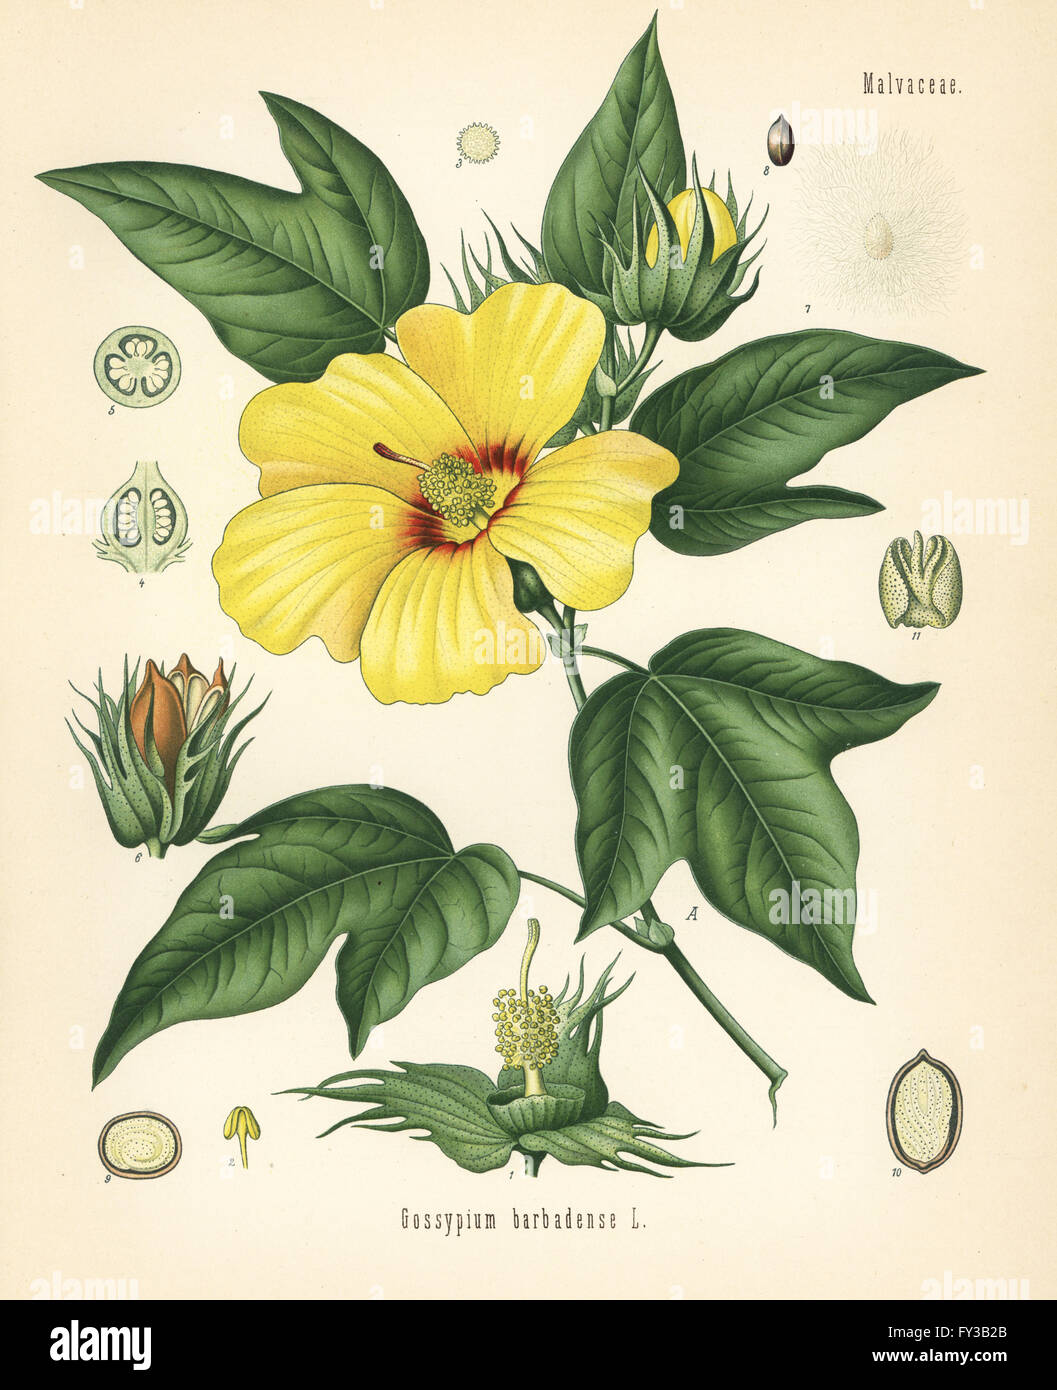 Sea island cotton plant, Gossypium barbadense. Chromolithograph after a botanical illustration from Hermann Adolph Koehler's Medicinal Plants, edited by Gustav Pabst, Koehler, Germany, 1887. Stock Photo